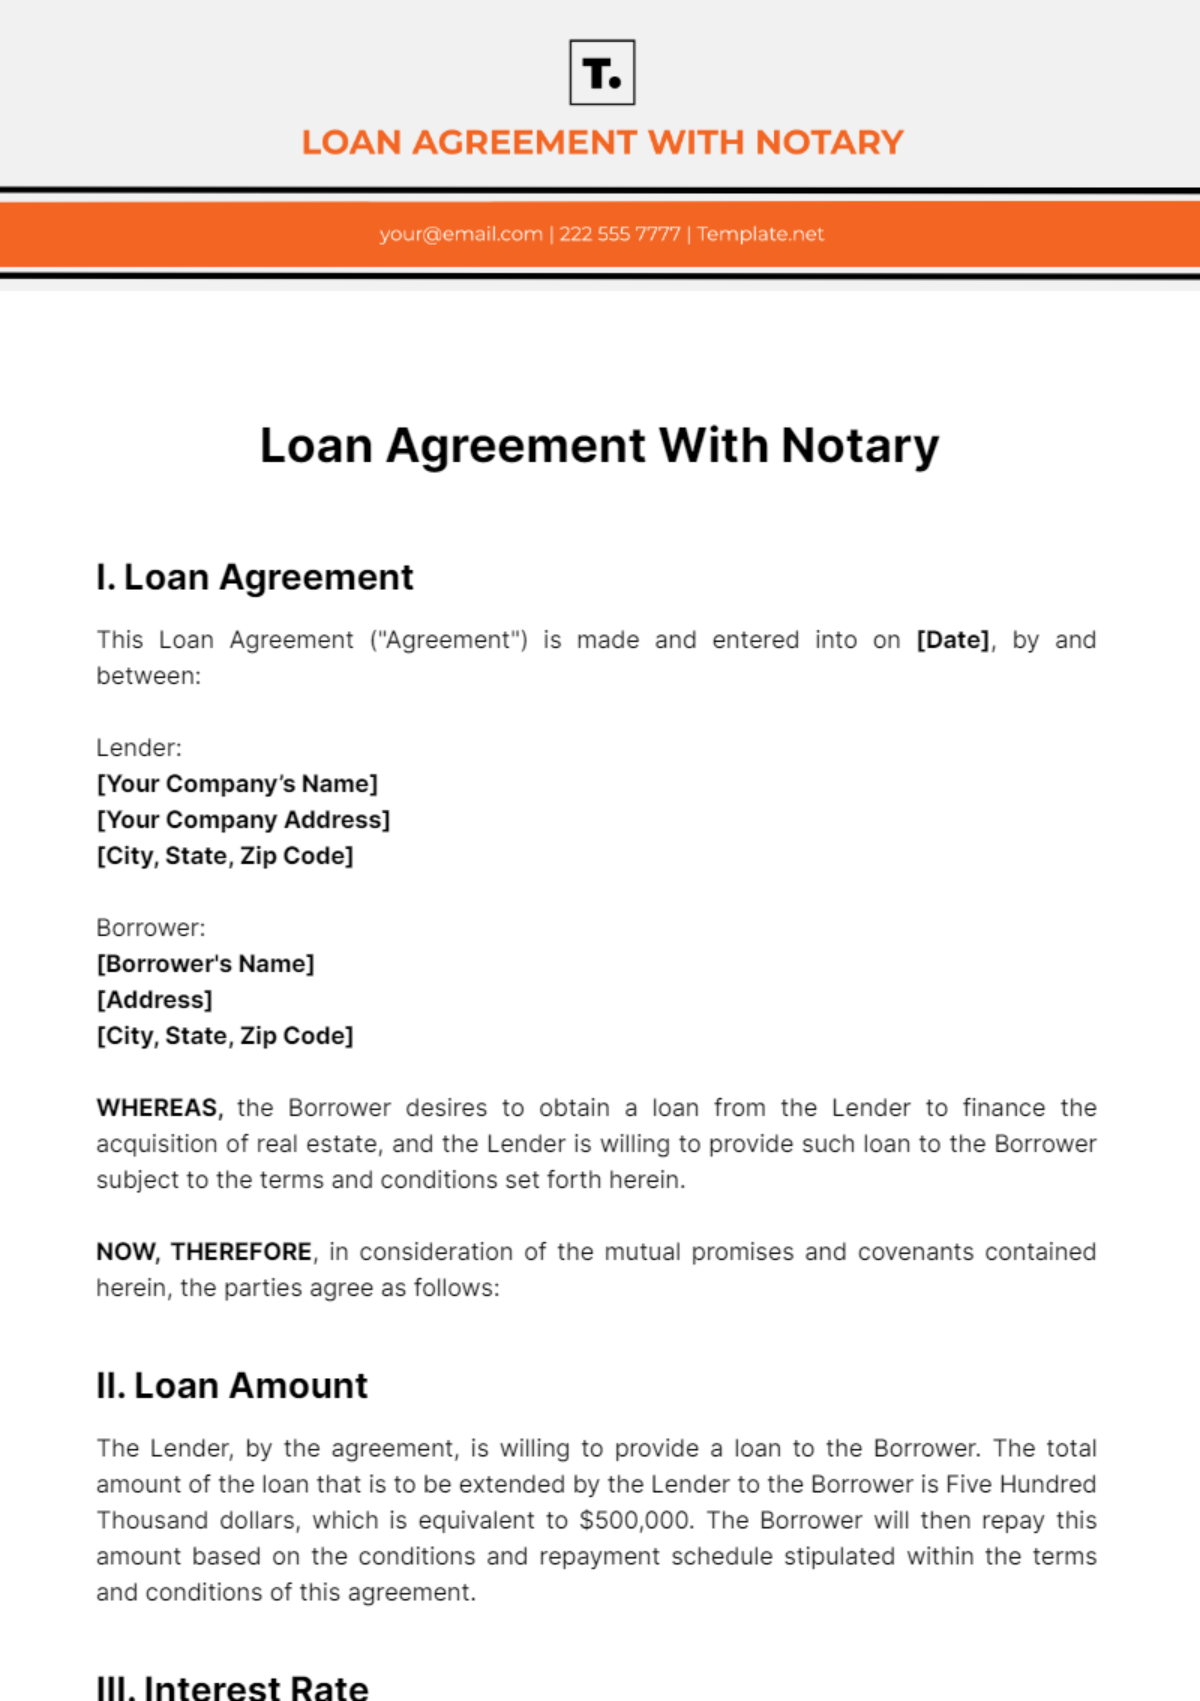 Free Loan Agreement With Notary Template